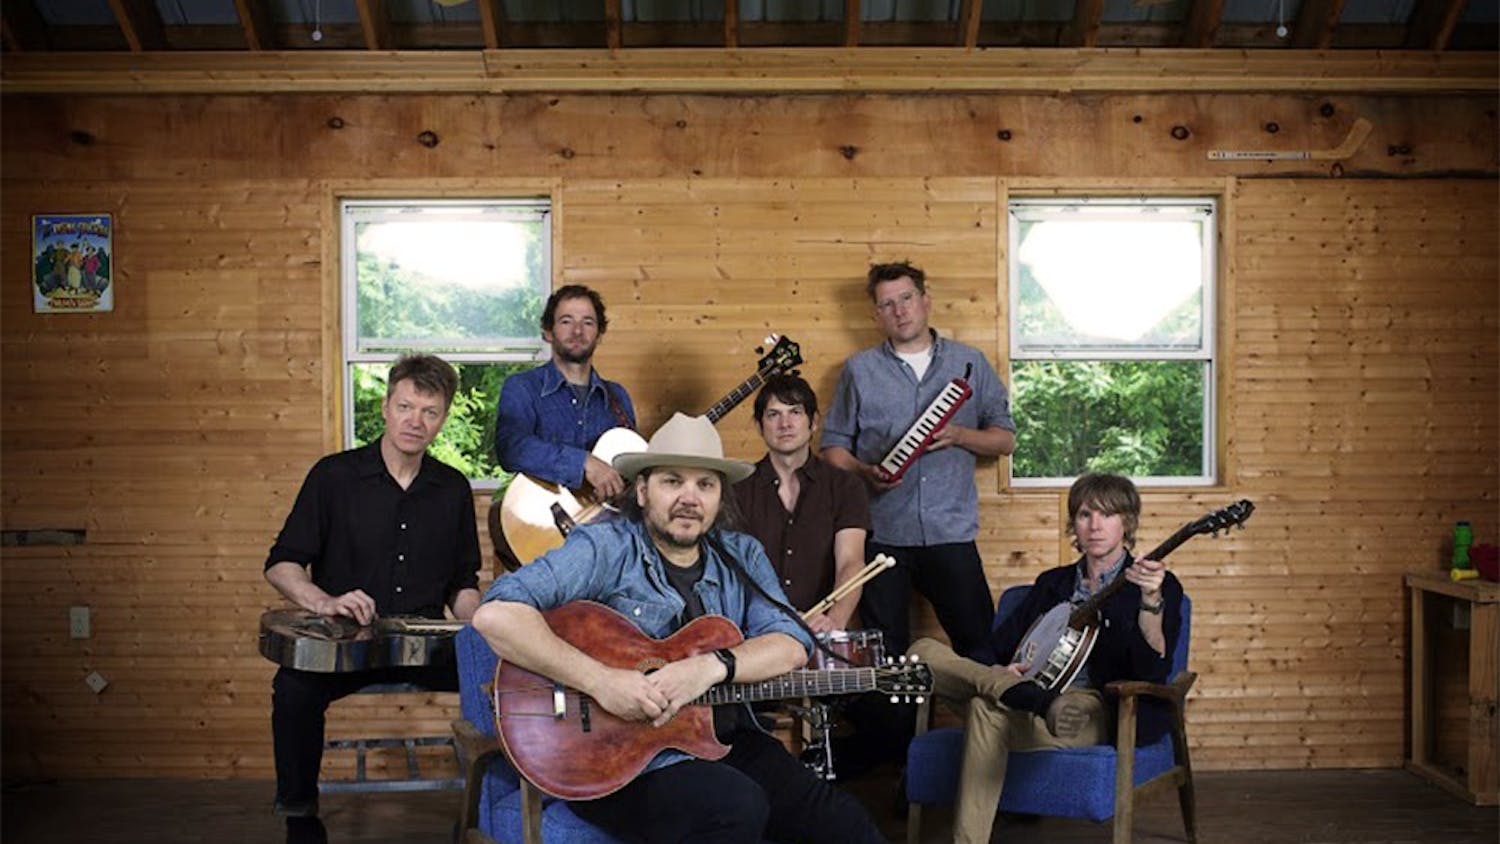 Wilco will play the IU Auditorium on Sept. 25. Two dollars of each ticket sold will be donated to children's reading programs in Bloomington.